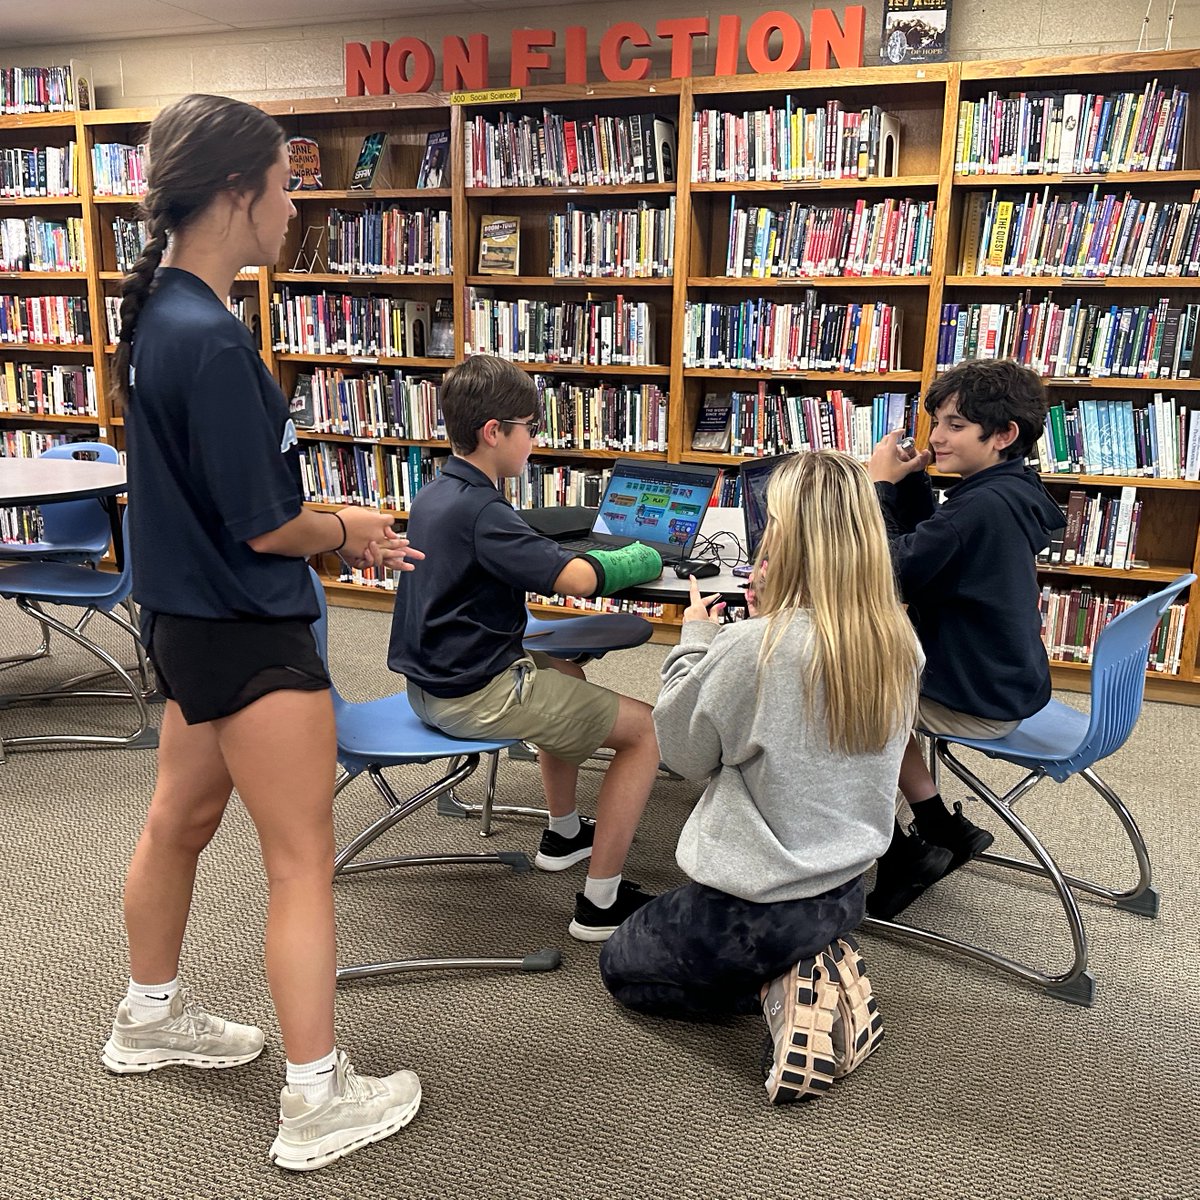 Library moments pretty much include it all.💙💛Having our tweens and teens interact and hear their conversations is always fun. Today, this meeting resulted in new signatures on this #PAGrade5 student's cast.